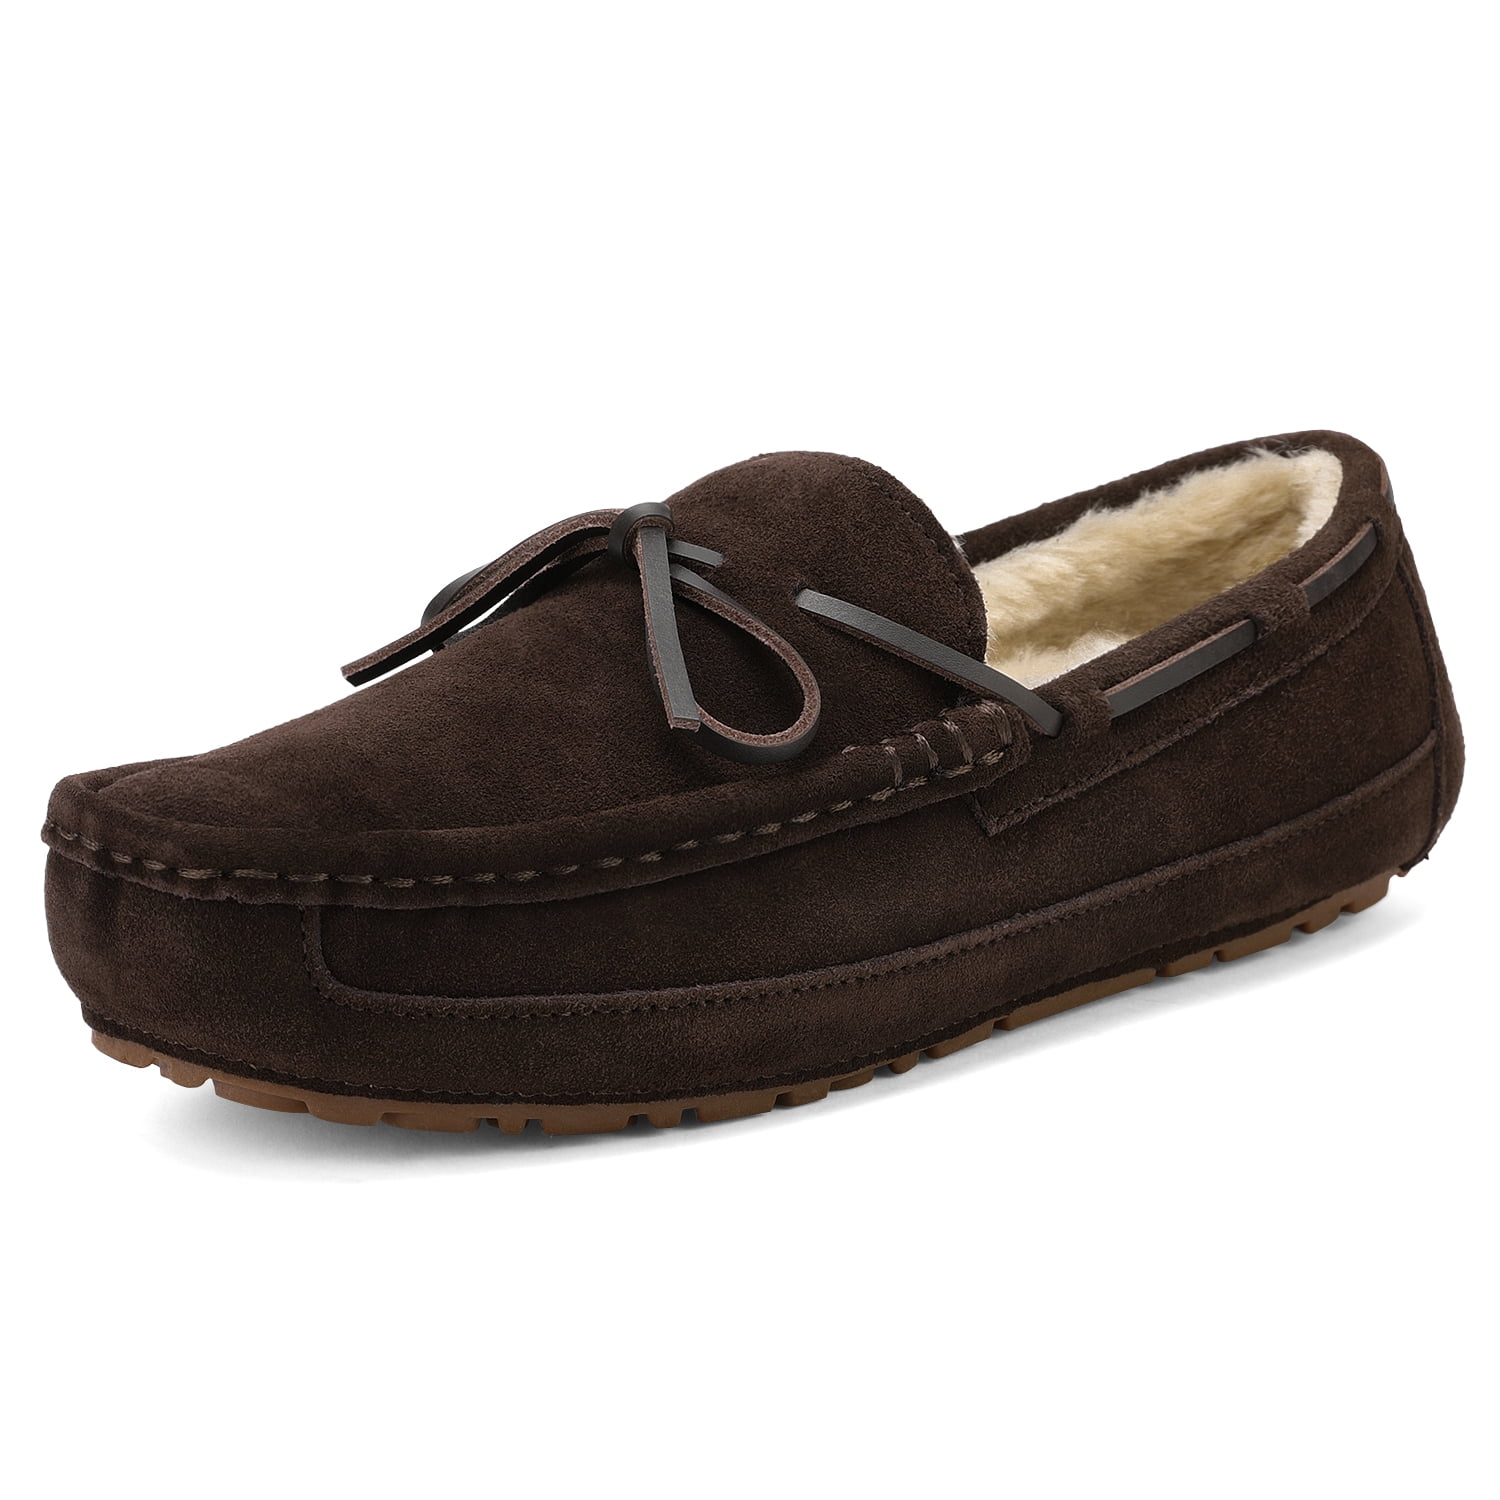 DREAM PAIRS Mens Suede Faux Fur Lined Moccasin Slippers 